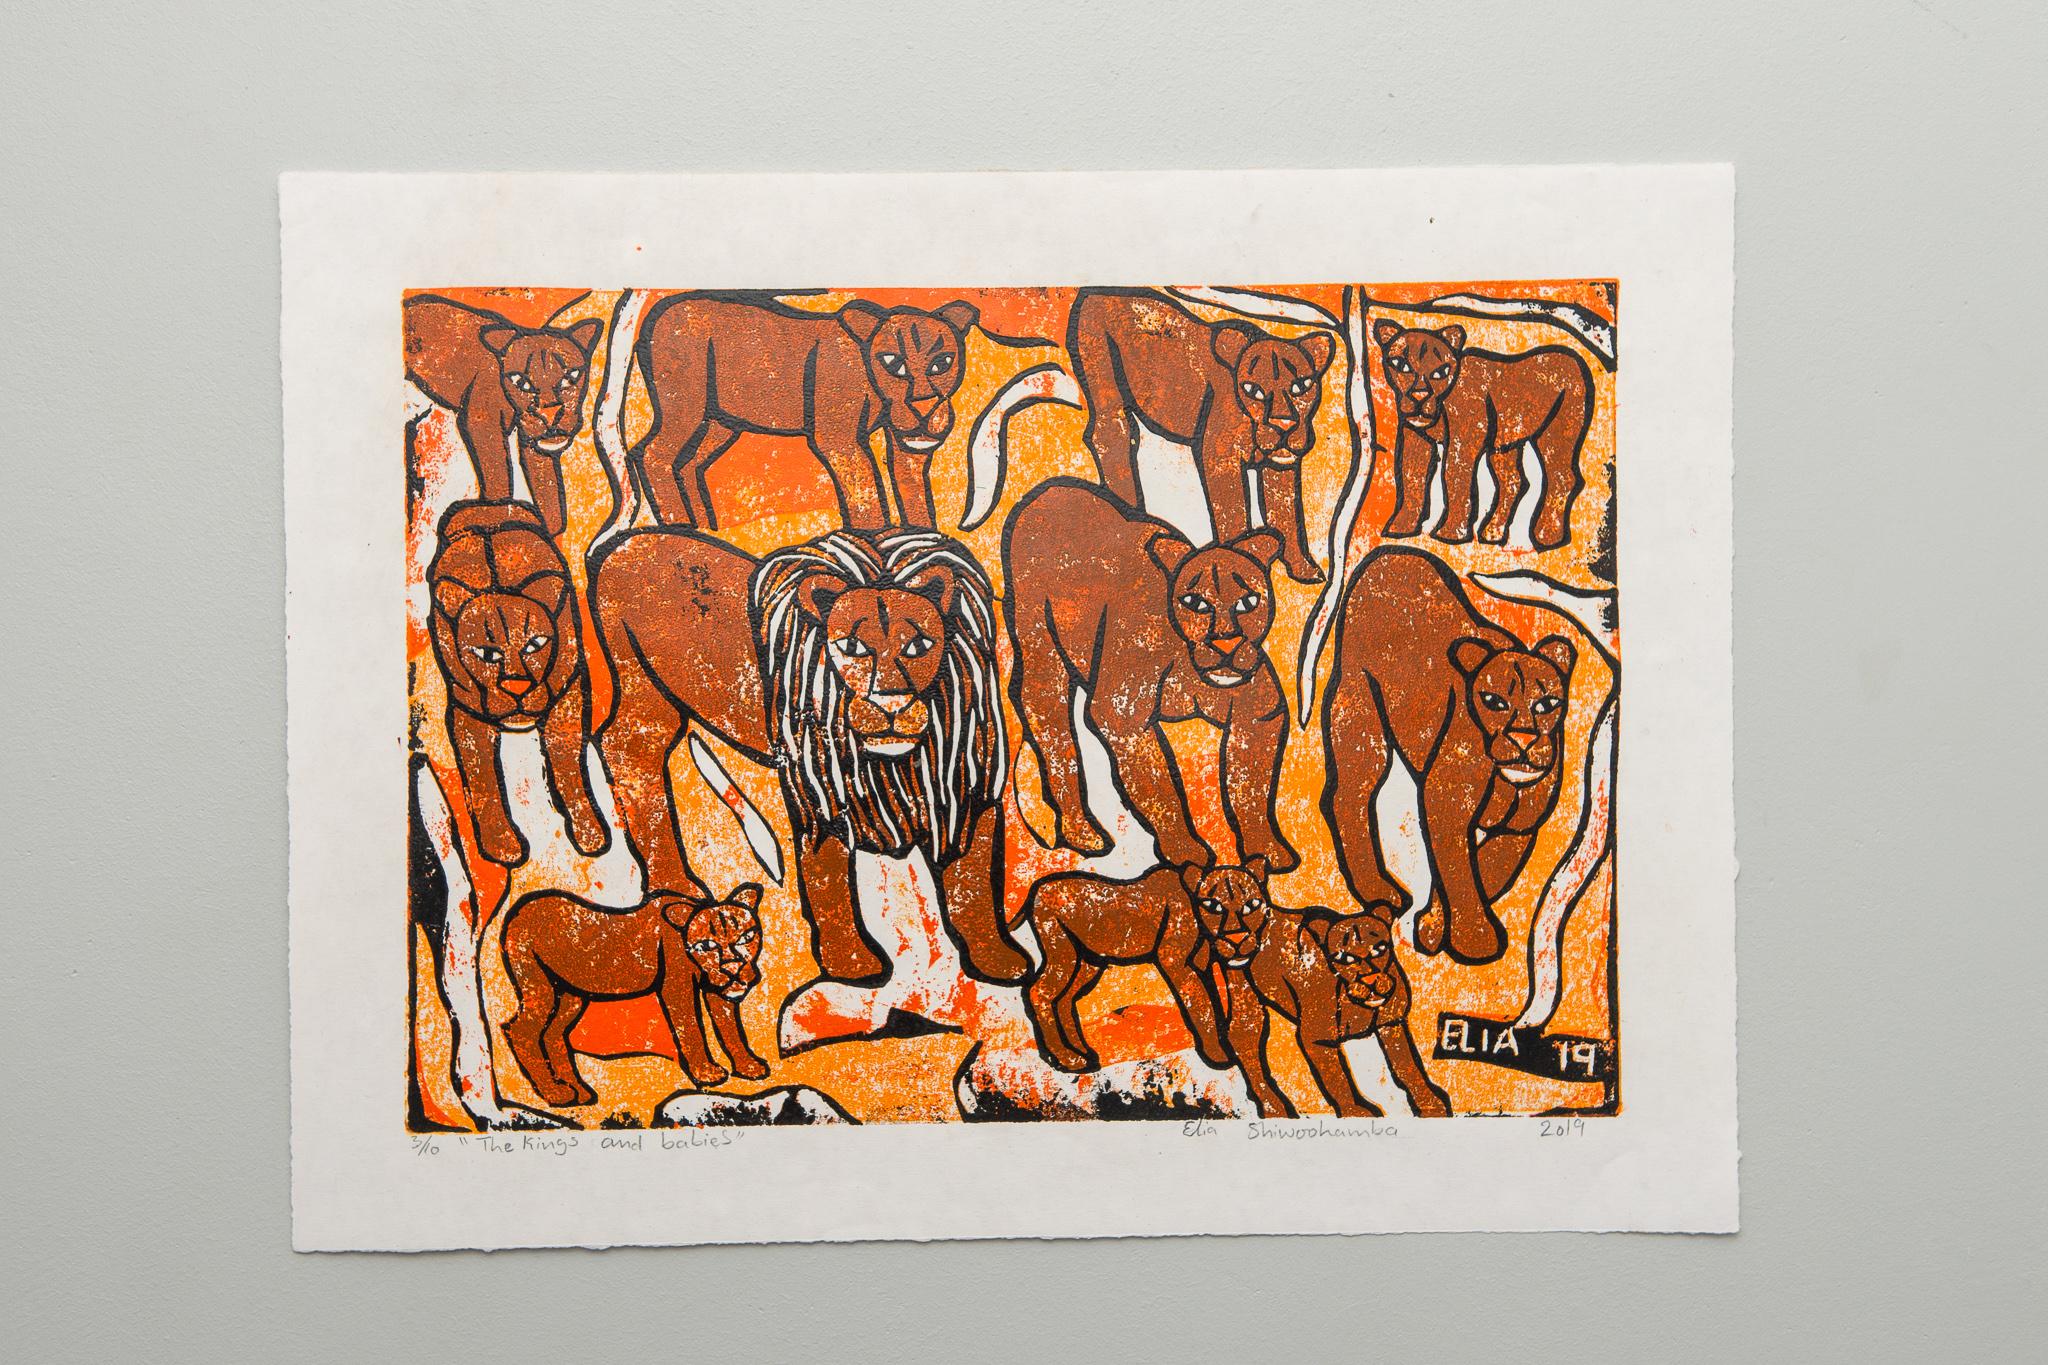 The Kings and babies, 2019. Cardboard print on paper. Edition of 10.

Elia Shiwoohamba was born in 1981 in Windhoek, Namibia. He graduated from the John Muafangejo Art Centre in Windhoek in 2006. Specialising in printmaking and sculpture,